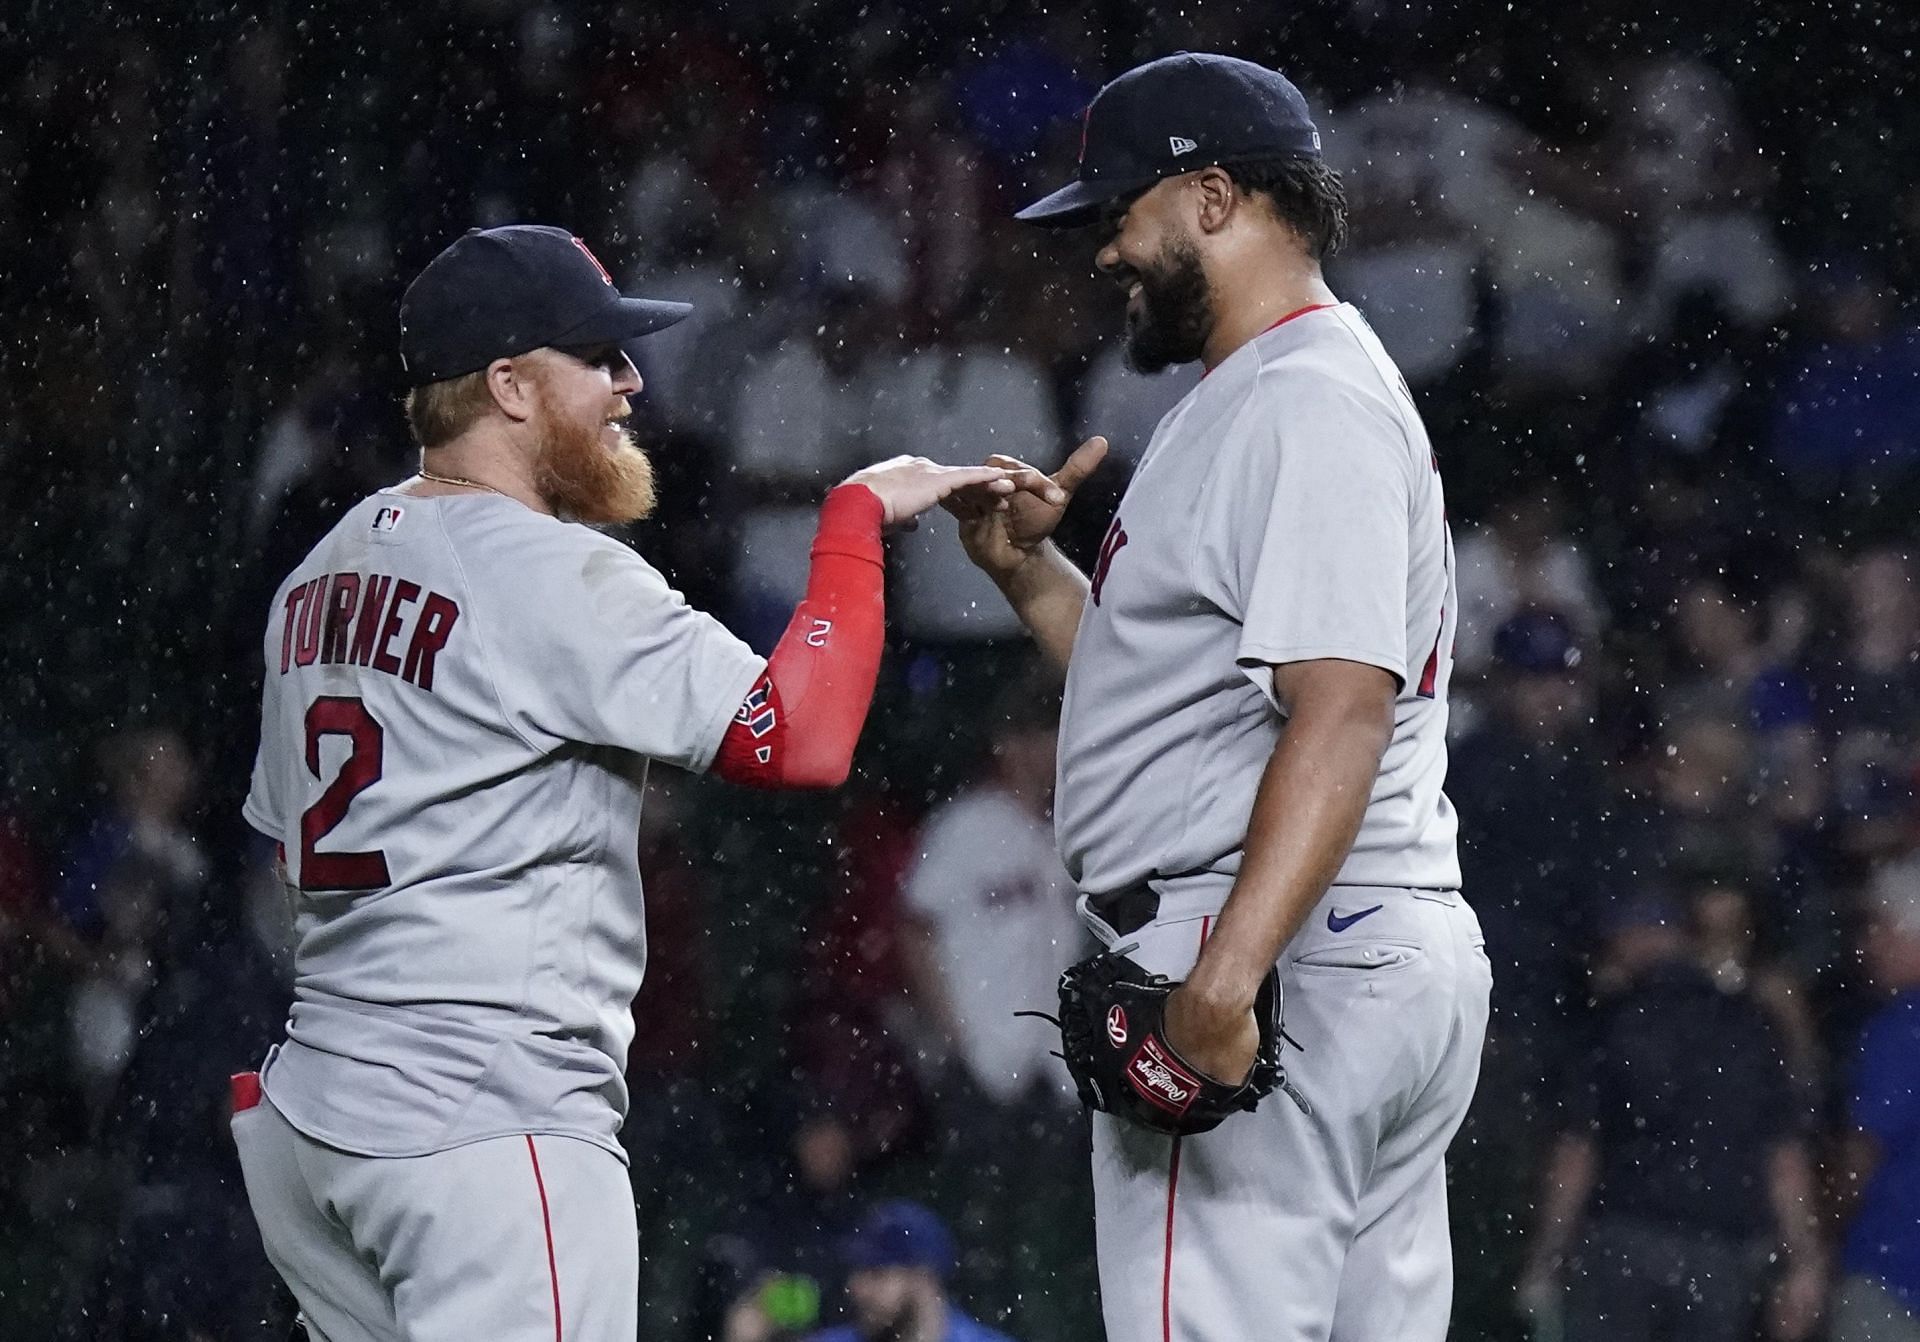 A player like Luis Arraez could help the Red Sox achieve success for a playoff run and a deeper offense looking into the future.